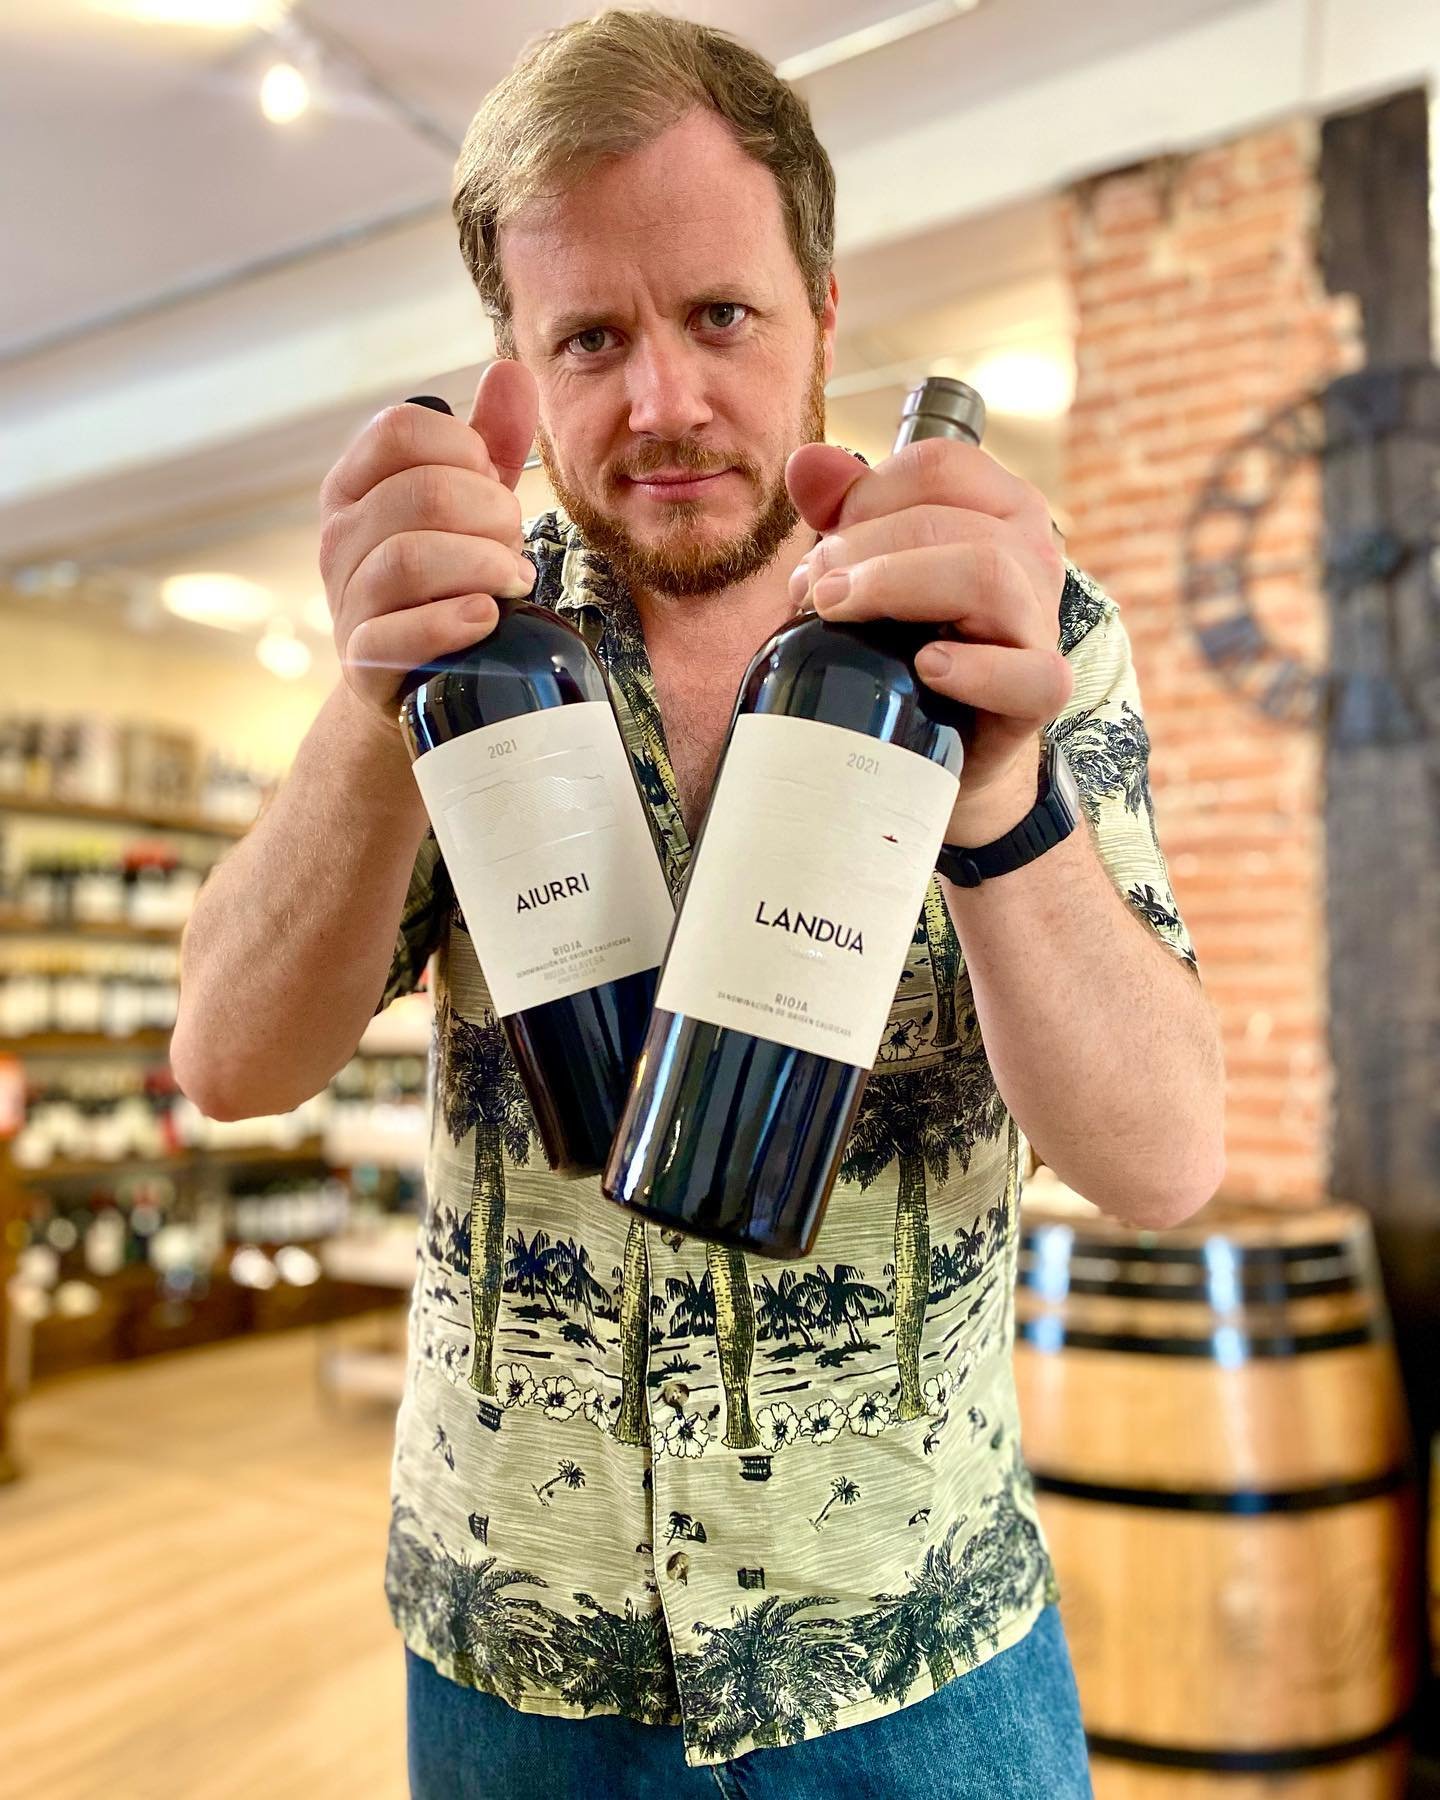 We are super to present a brand new project from @almacarraovejas which we now have, in limited numbers, in our shop! Aiurri and Landua from Leza in the Rioja Alavesa subzone of @rioja These are wines made from small plots. Landua - a multivarietal b